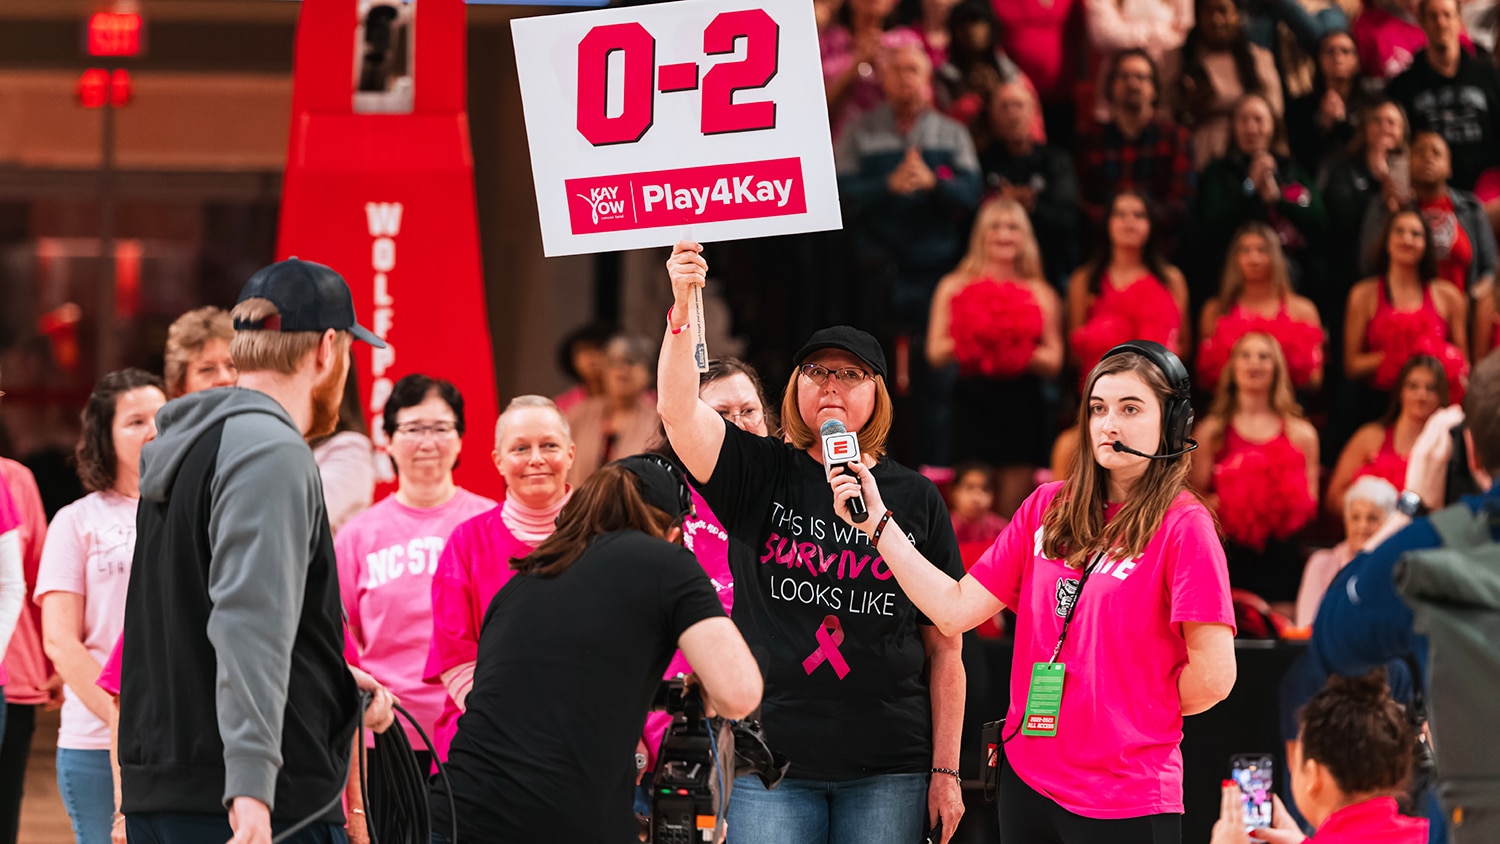 D'Lyn Ford, a staffer with NC State's College of Agriculture and Life Sciences, speaks on behalf of fellow breast cancer survivors at the annual Play4Kay game.